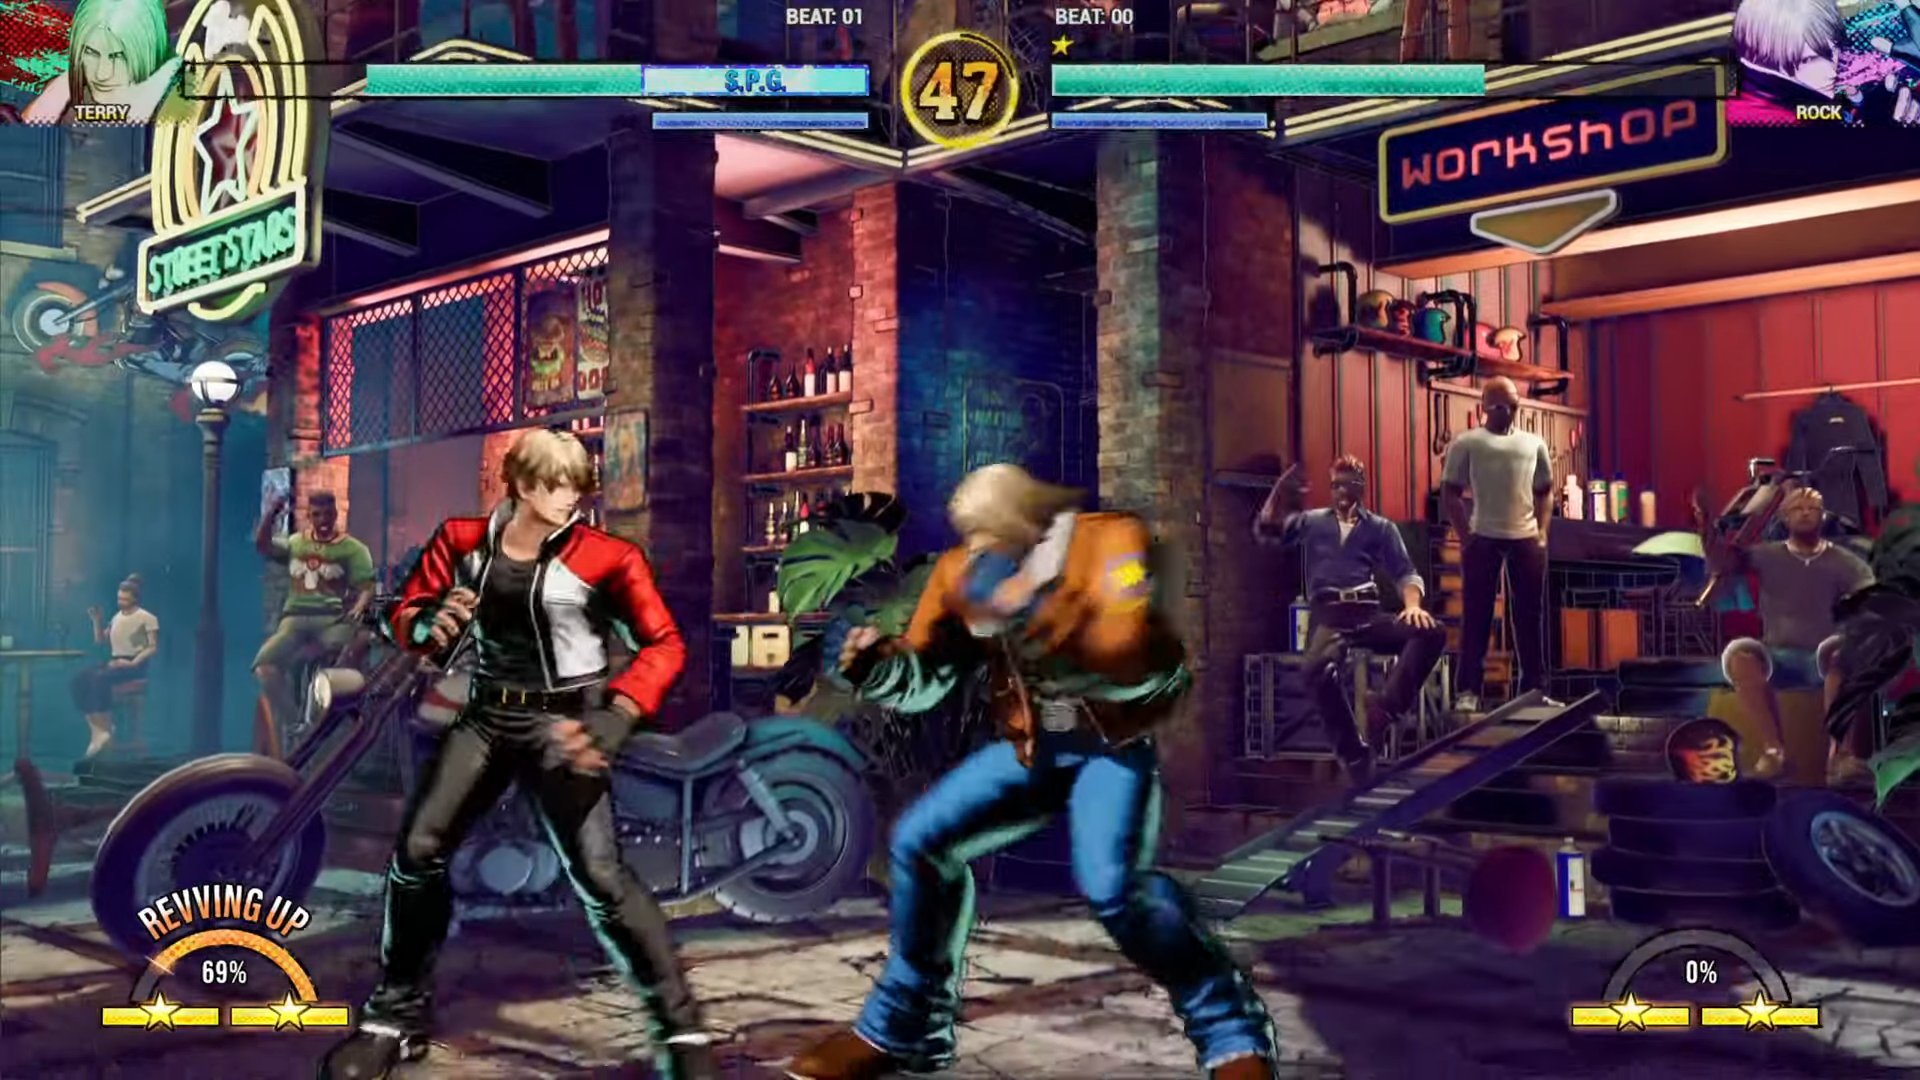 Fatal Fury: City of the Wolves